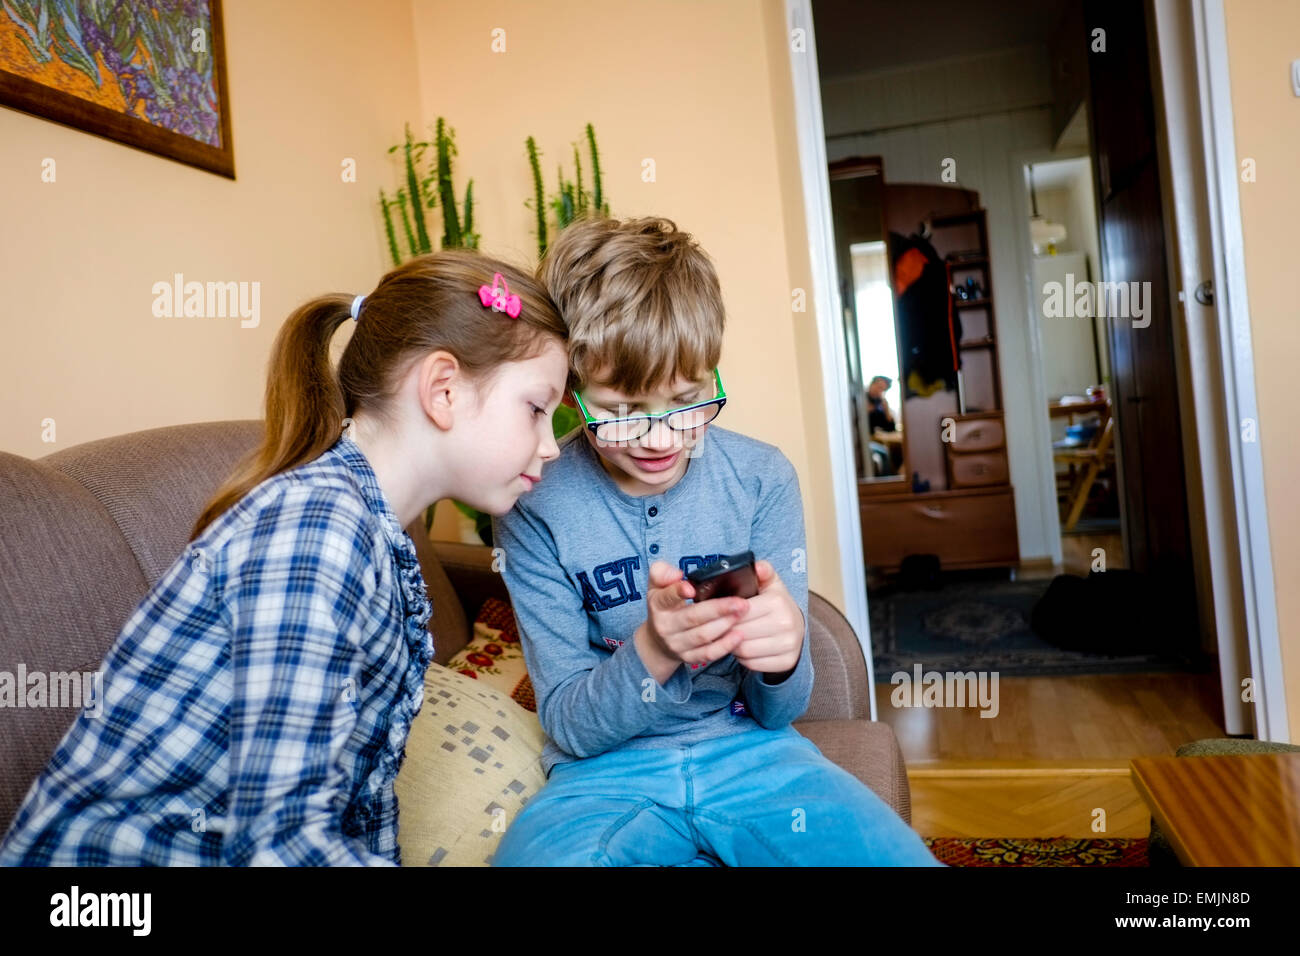 kid kids sister brother child children play mobile phone telephone happy 6 7 8 9 10 old Stock Photo